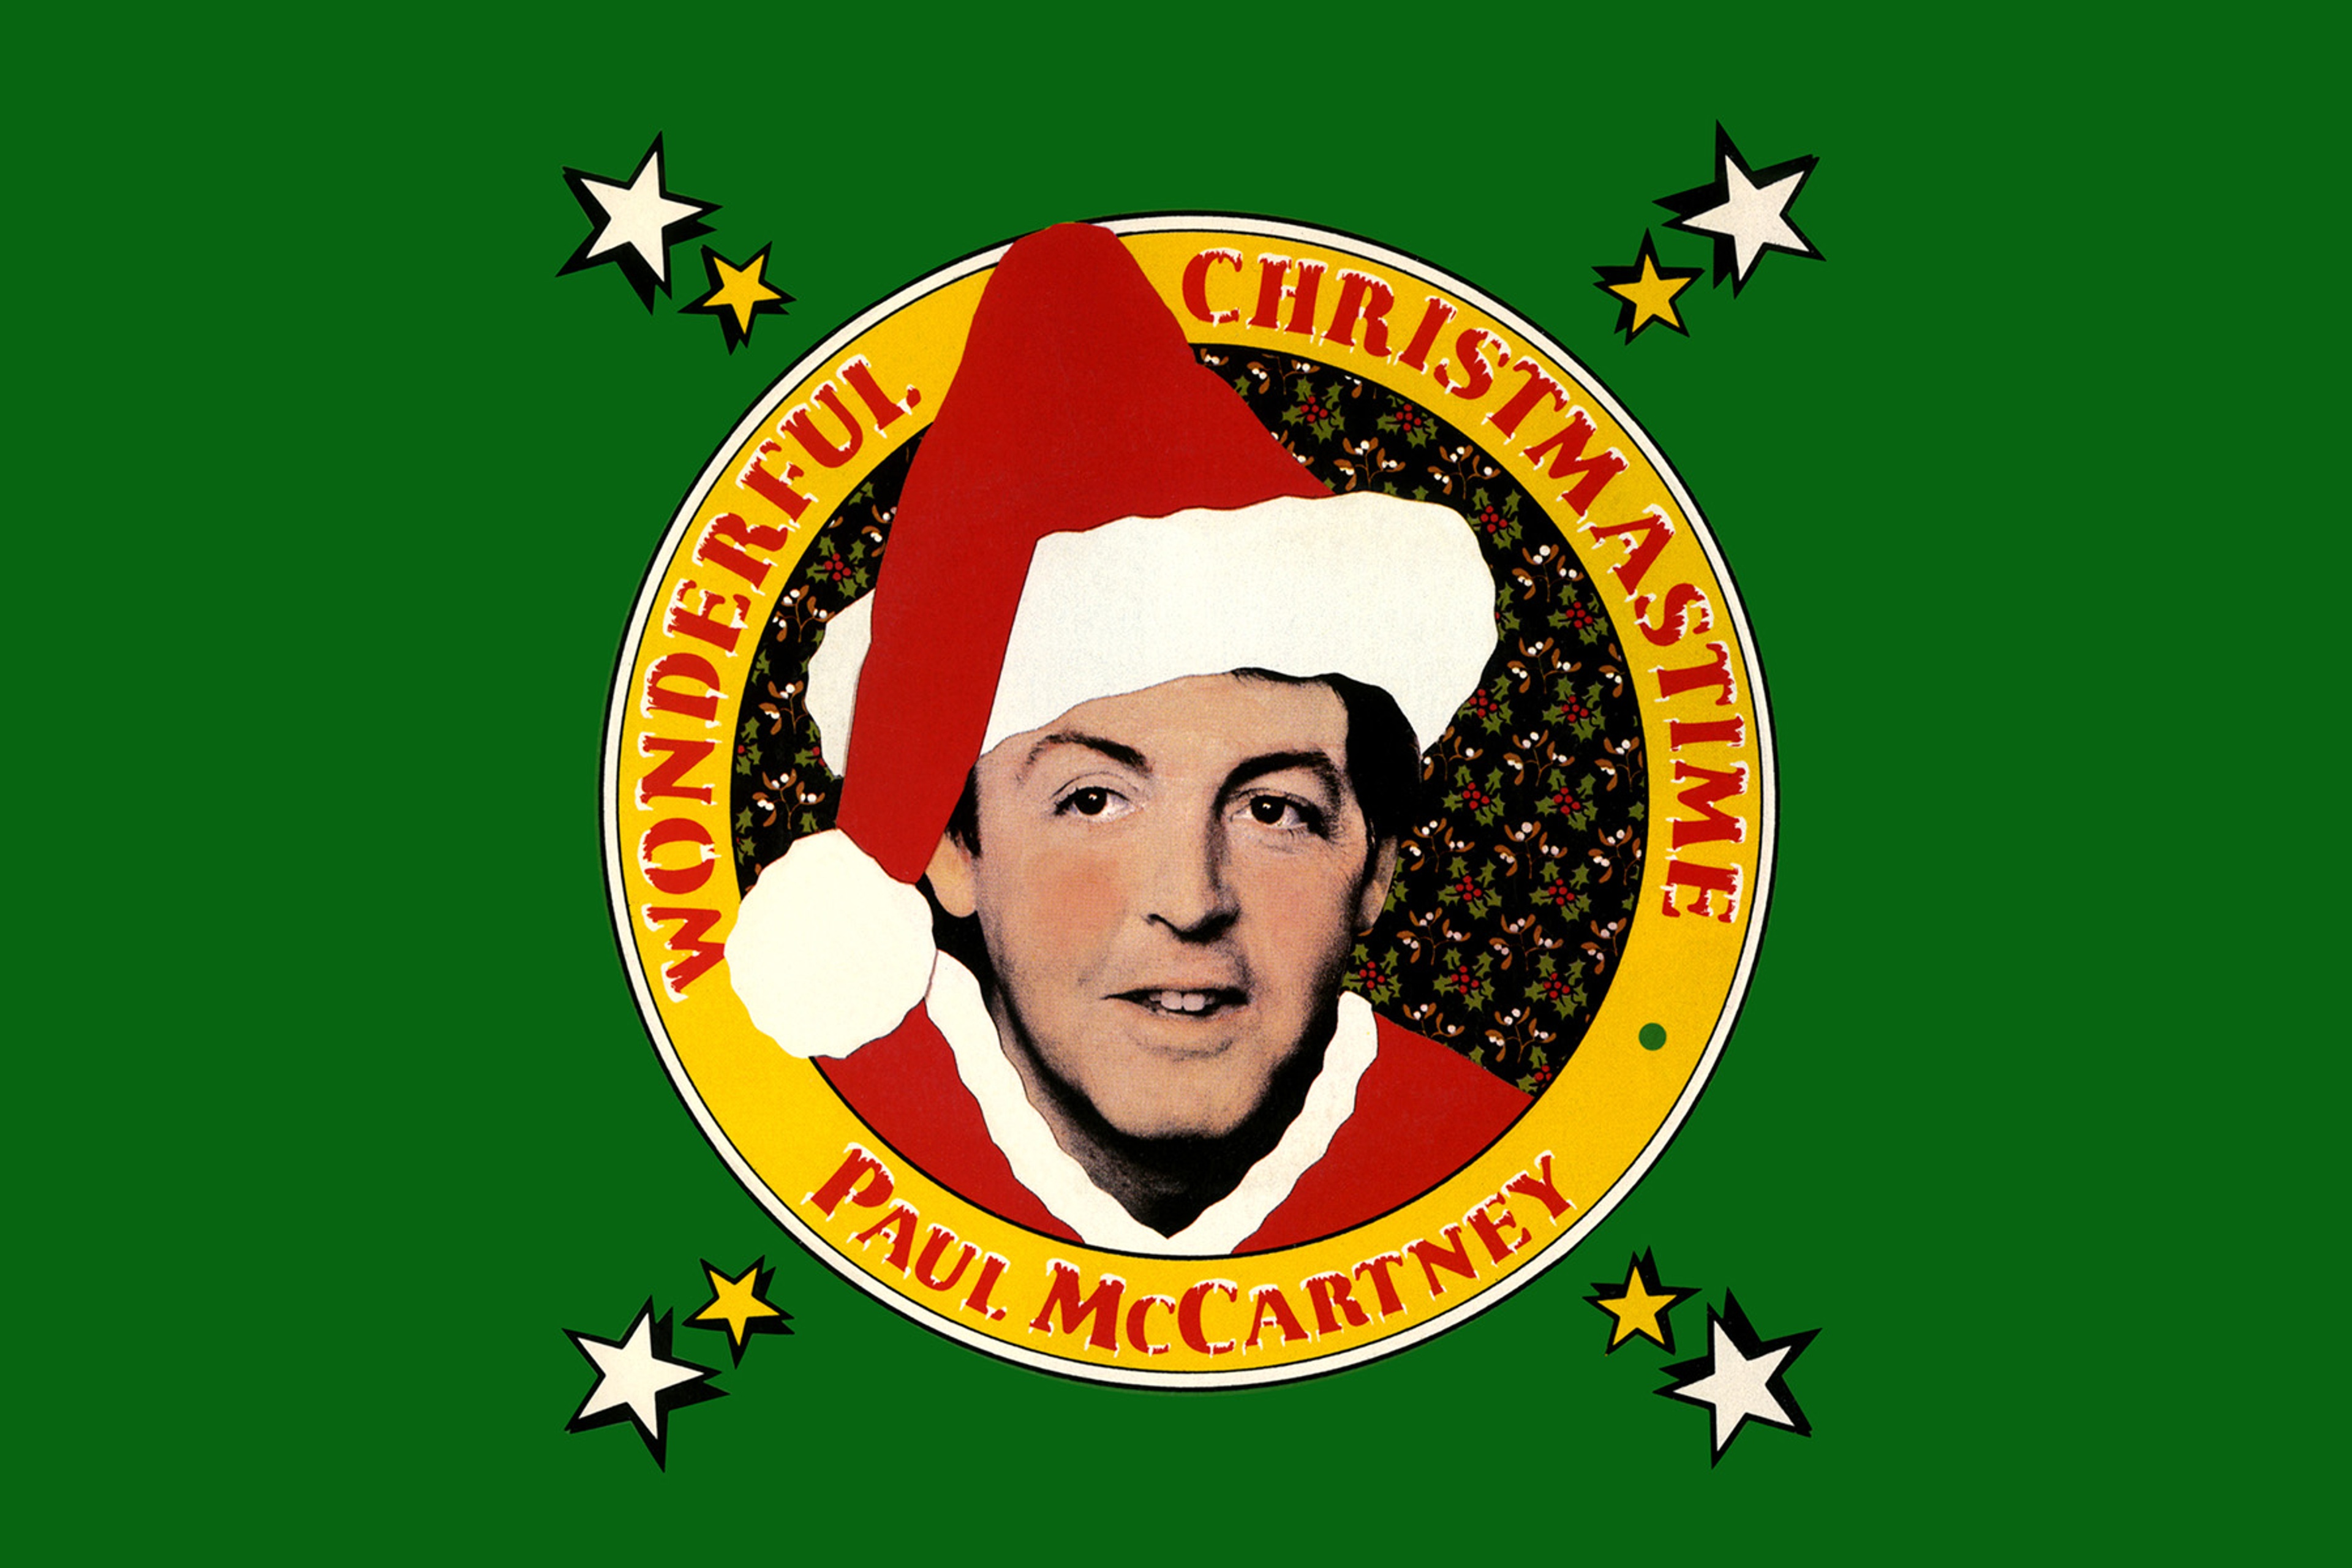 Graphic using the ‘Wonderful Christmastime’ single cover